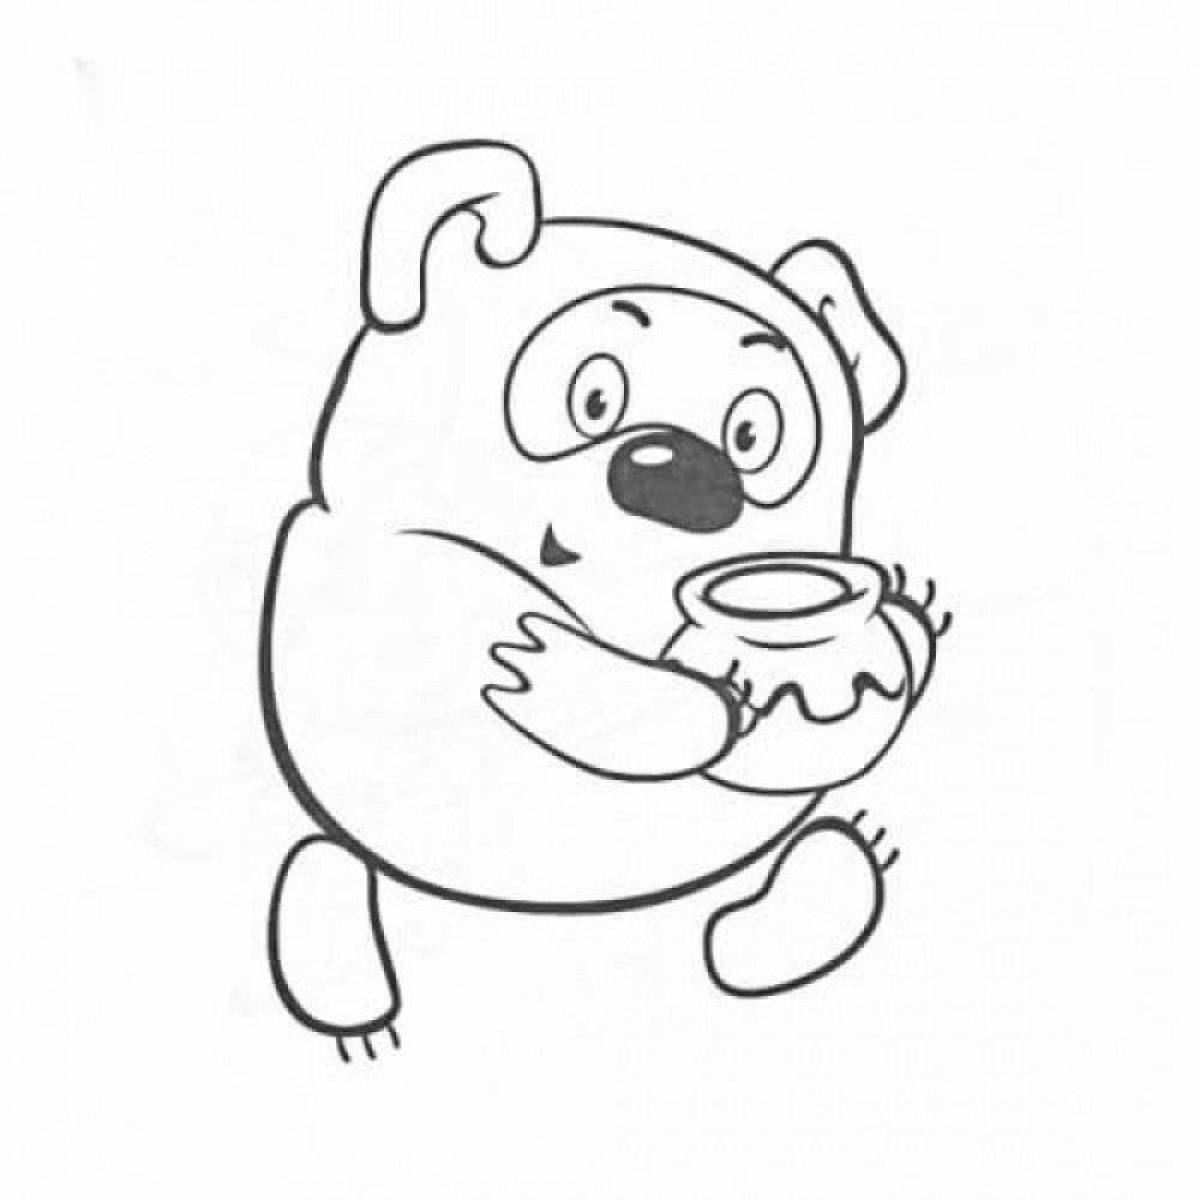 Winnie the pooh dazzling coloring book